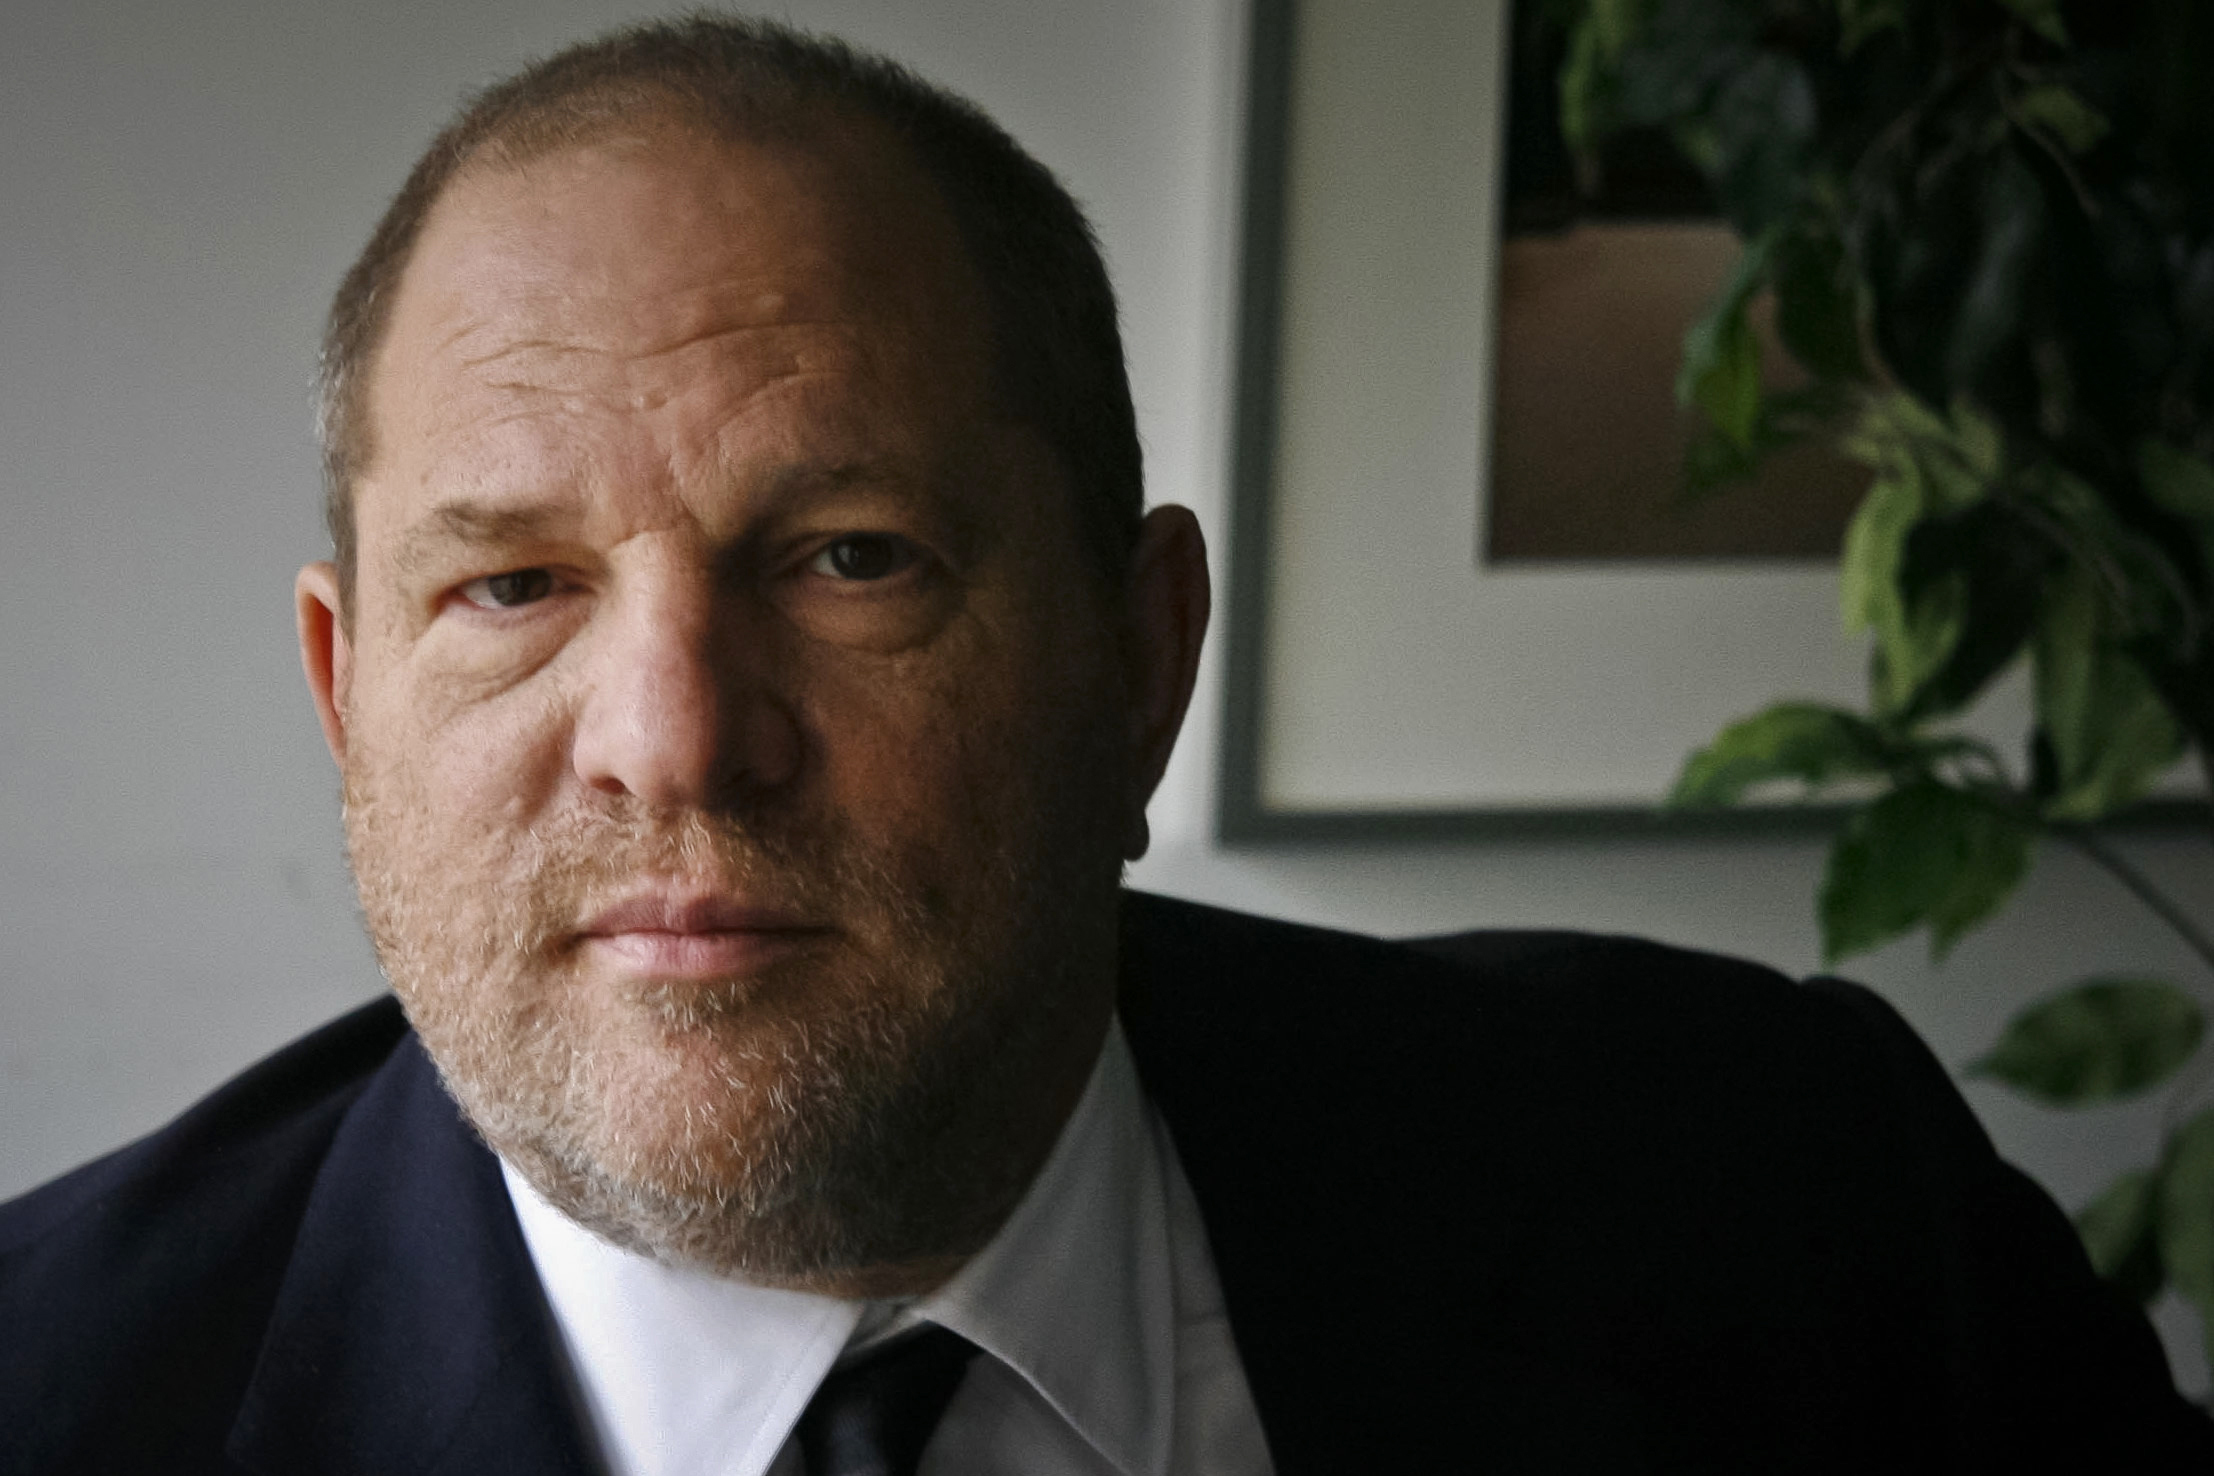 PHOTO: In this Nov. 23, 2011 file photo, film producer Harvey Weinstein poses for a photo in New York